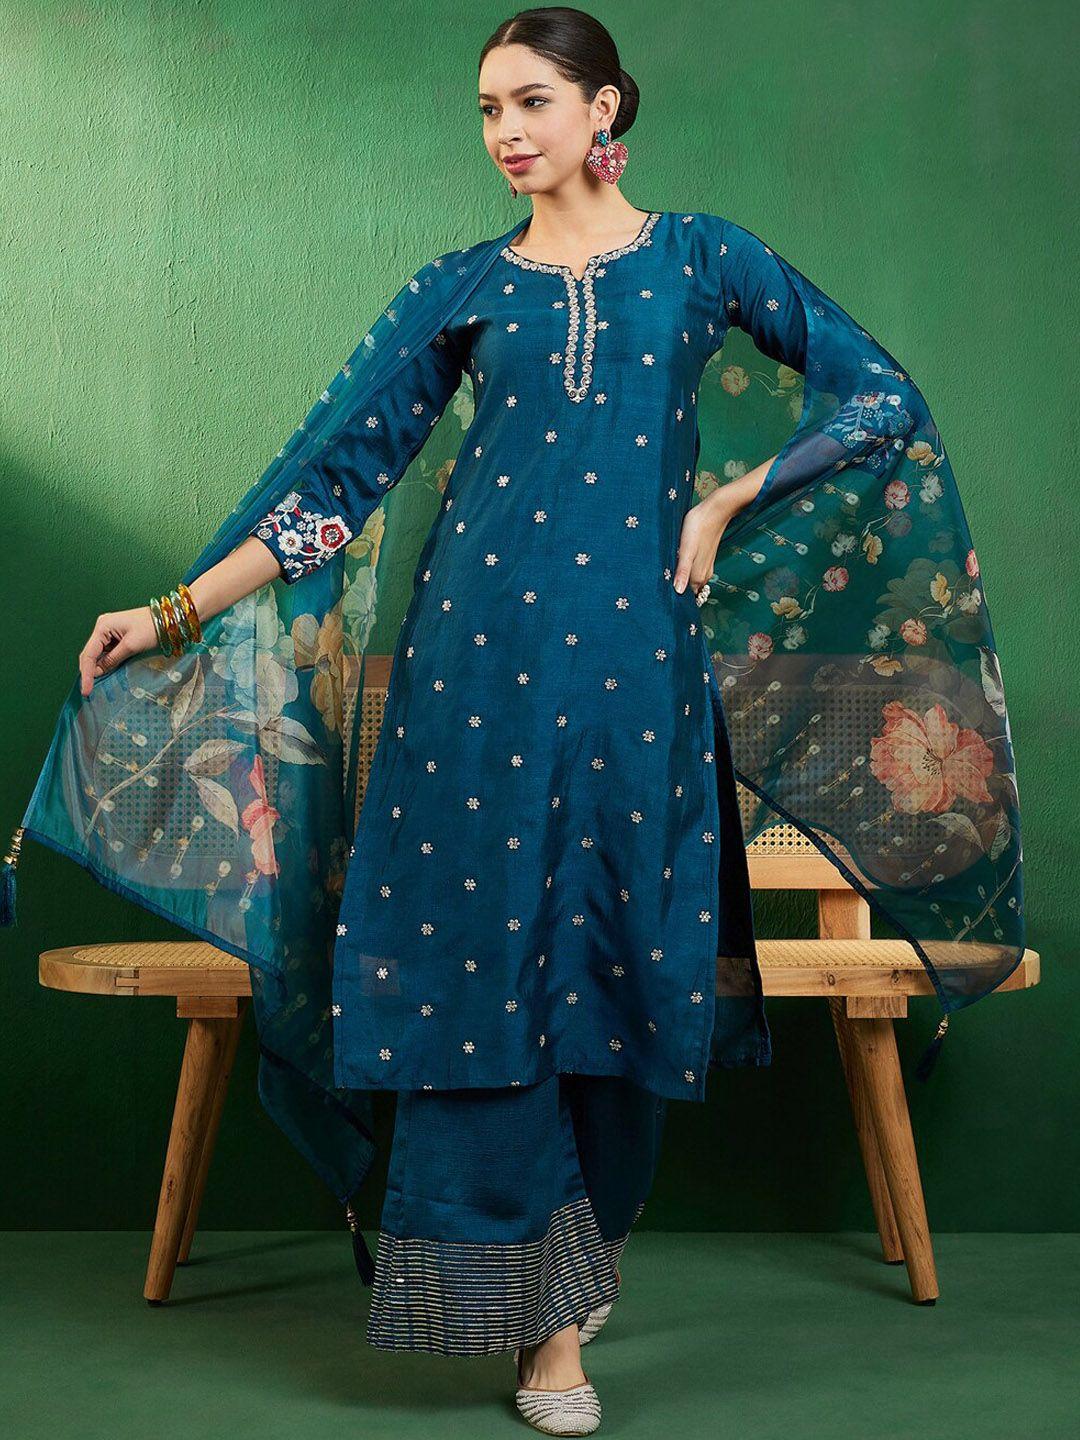 sangria teal blue floral embroidered straight kurta with palazzos & dupatta